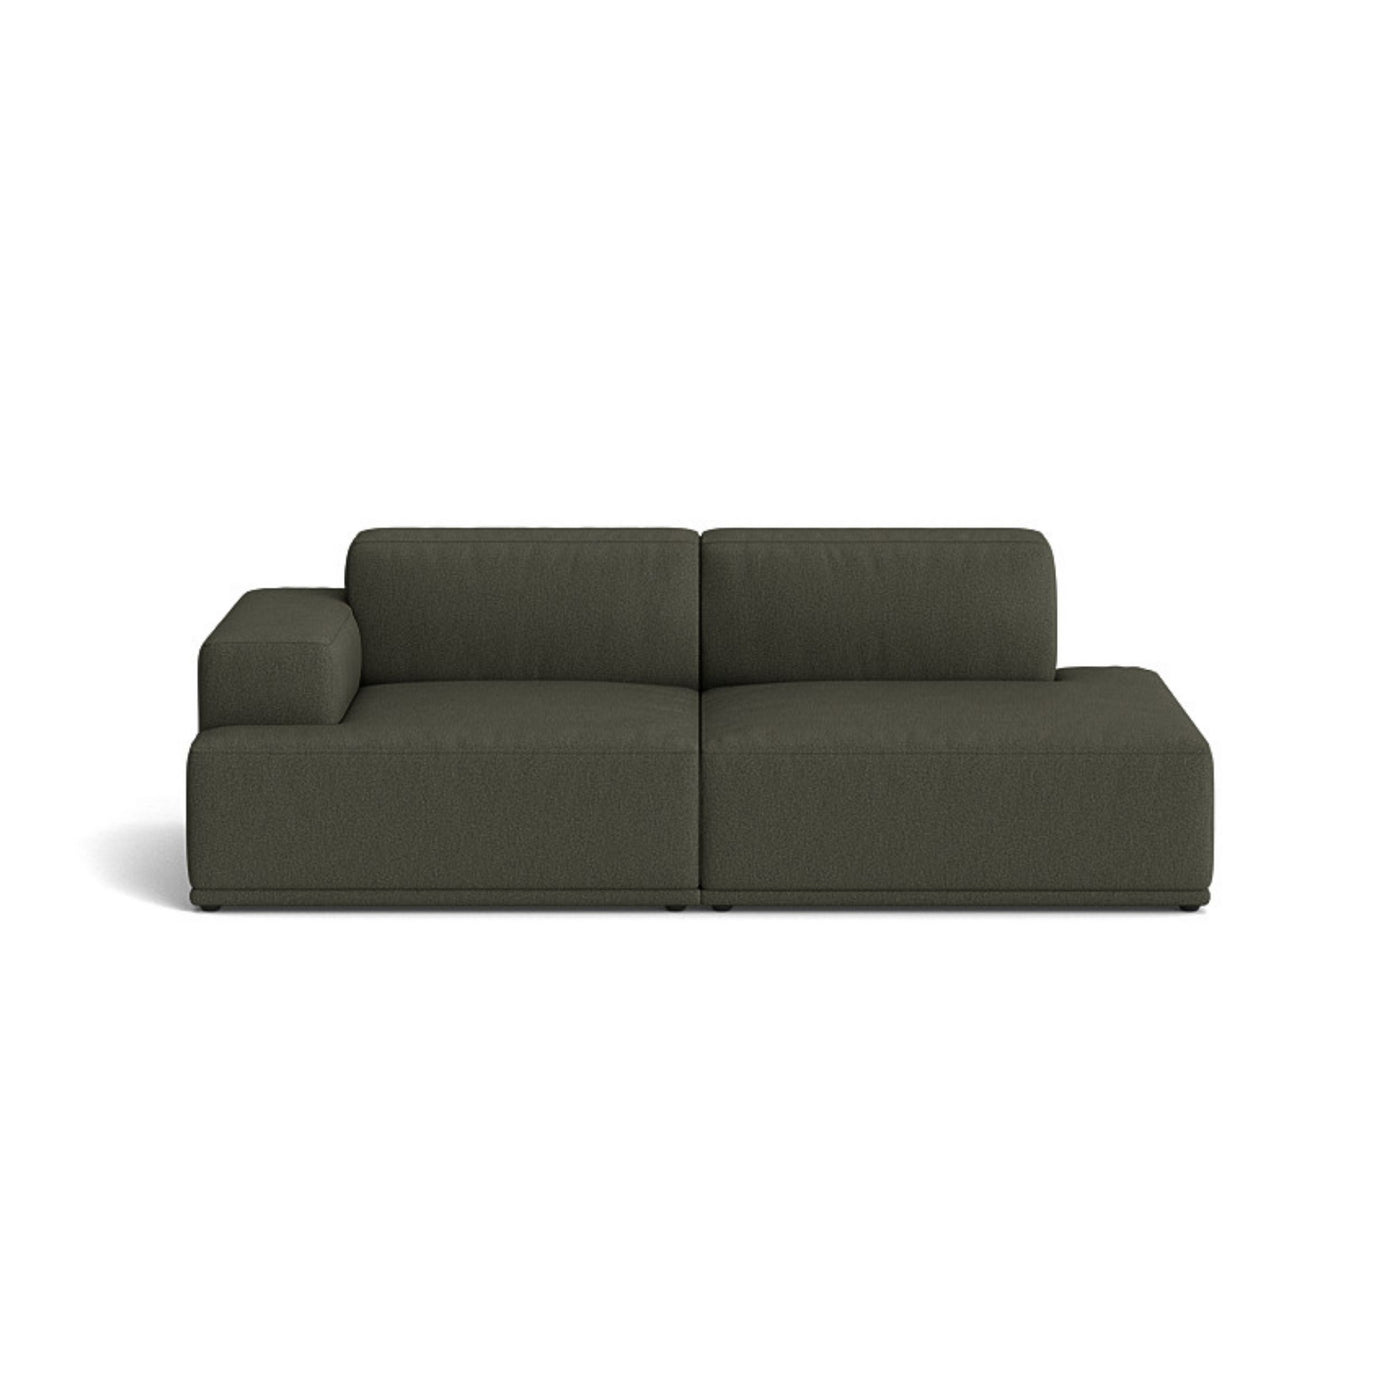 Muuto Connect Soft Modular 2 Seater Sofa, configuration 2. made-to-order from someday designs. #colour_clay-14